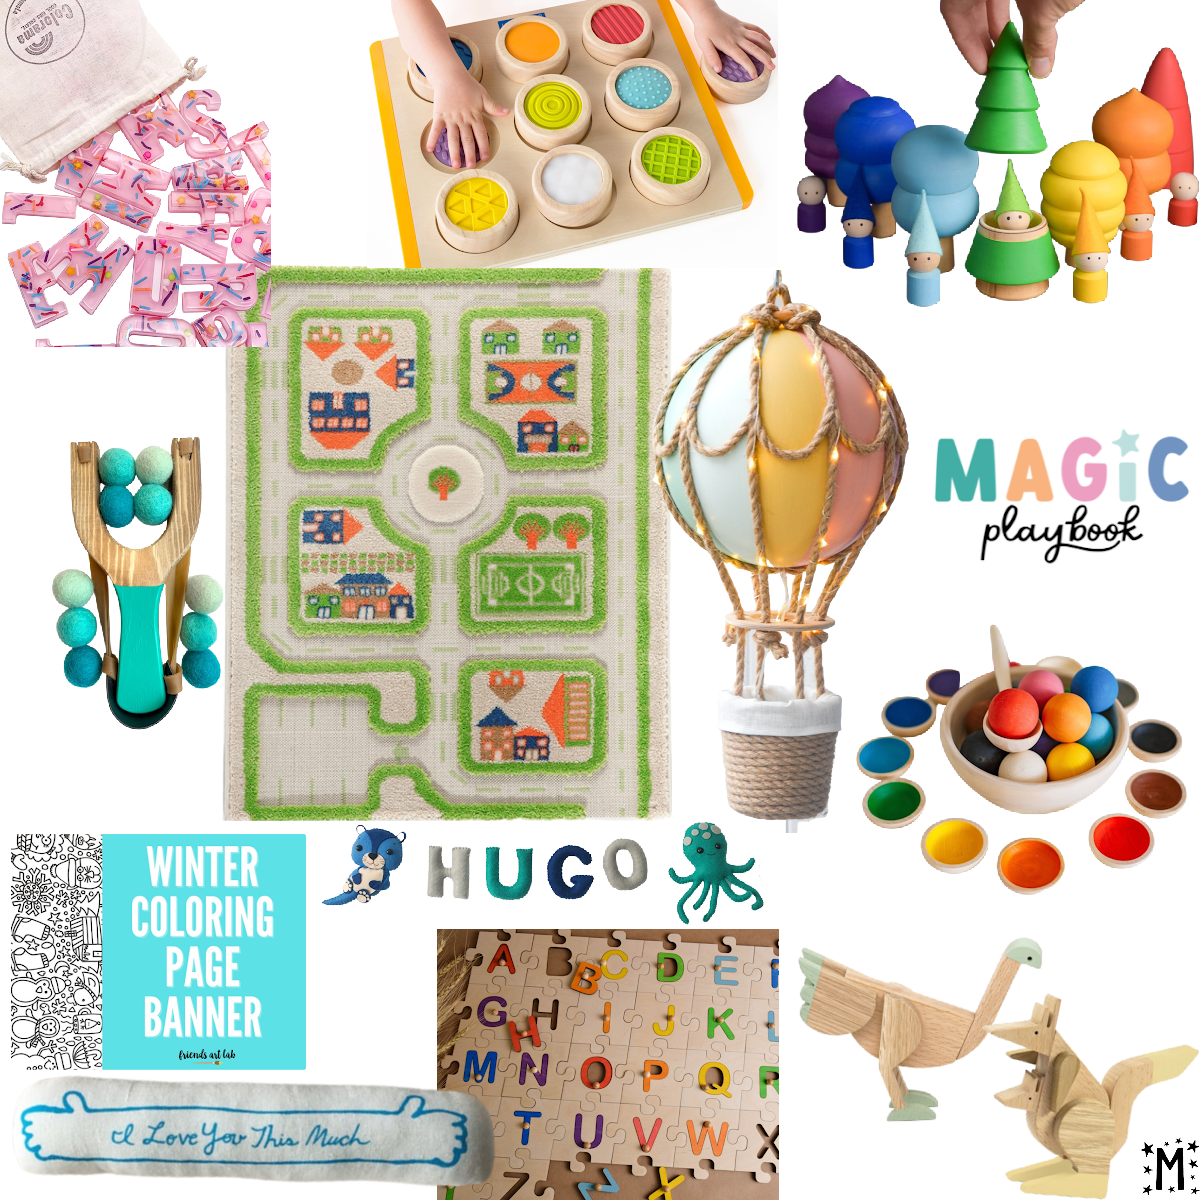 2021 Holiday Gift Guide - Kids Gifts From Small and Independent Brands —  MiLOWE